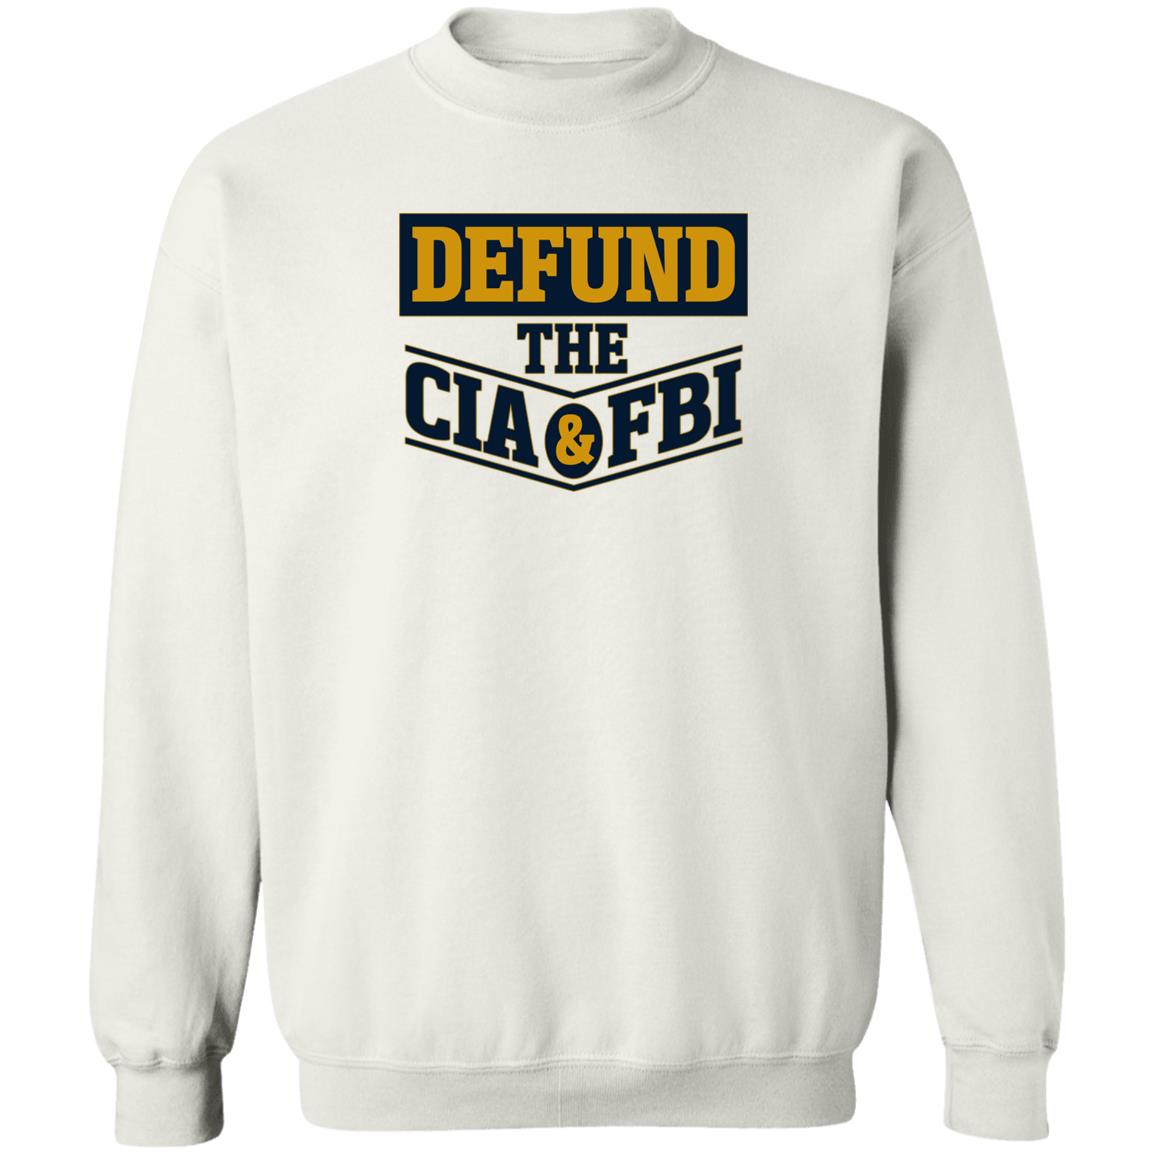 Defund The Cia And Fbi Shirt 1